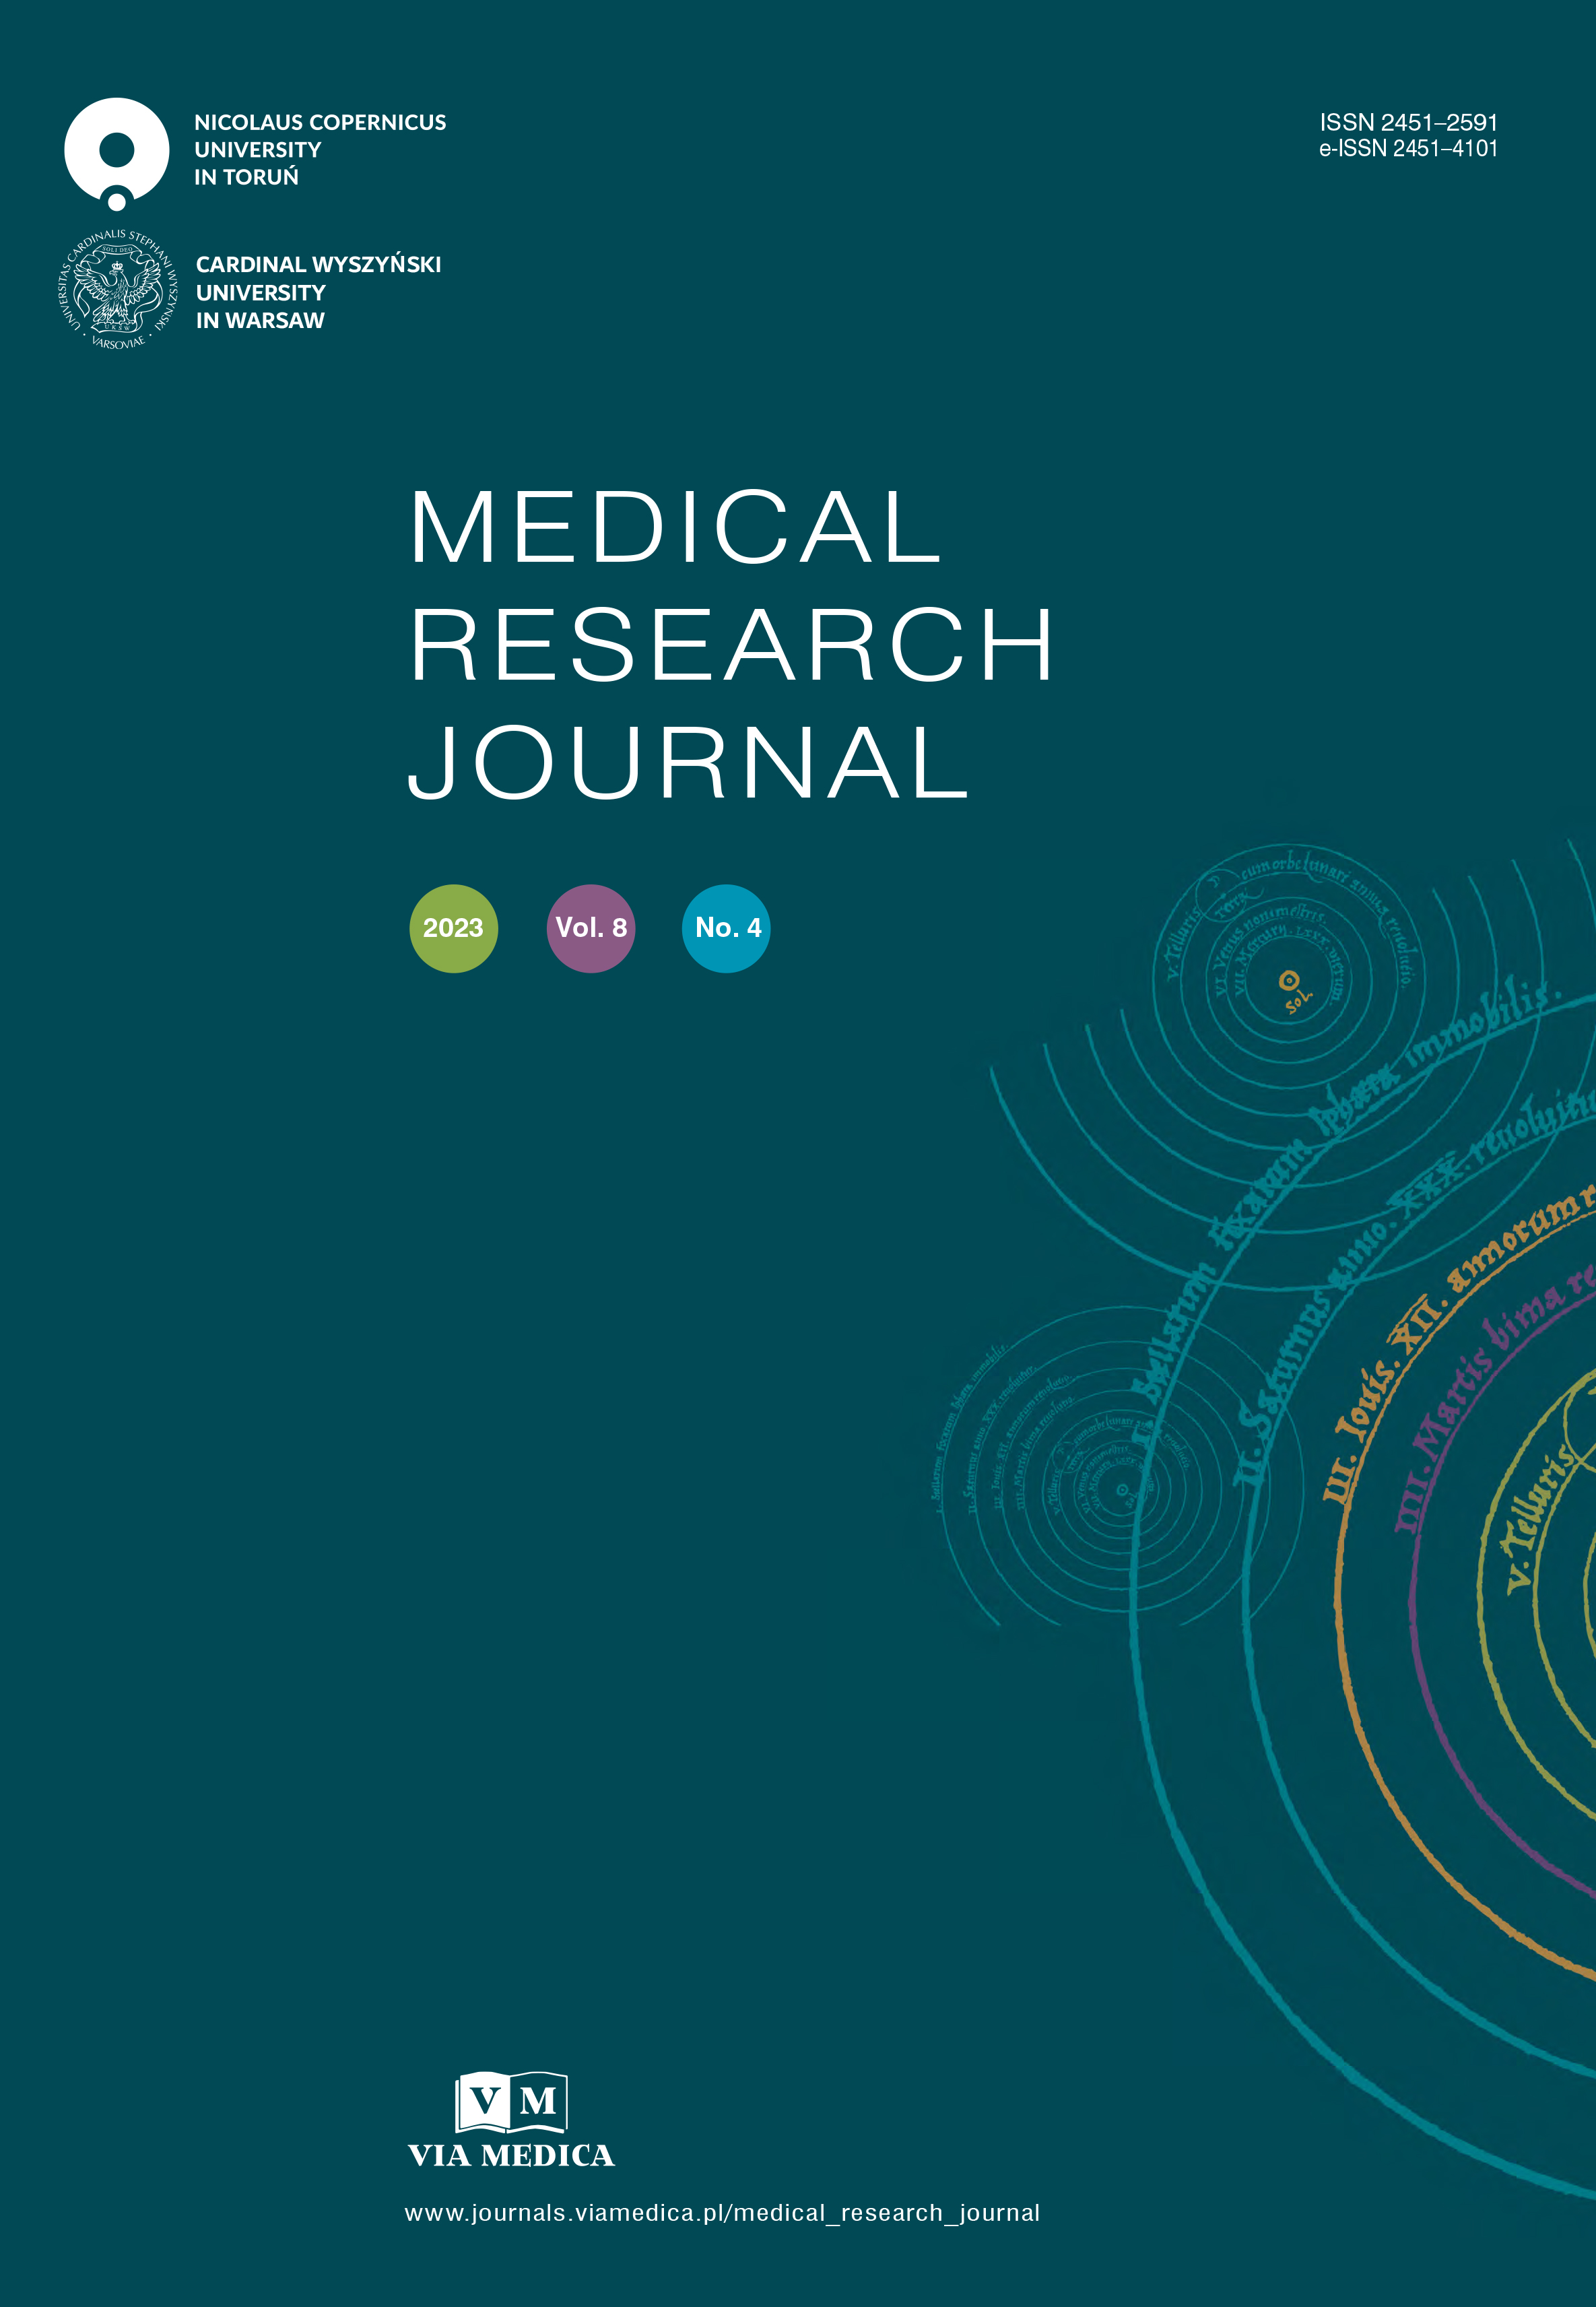 what is a research journal